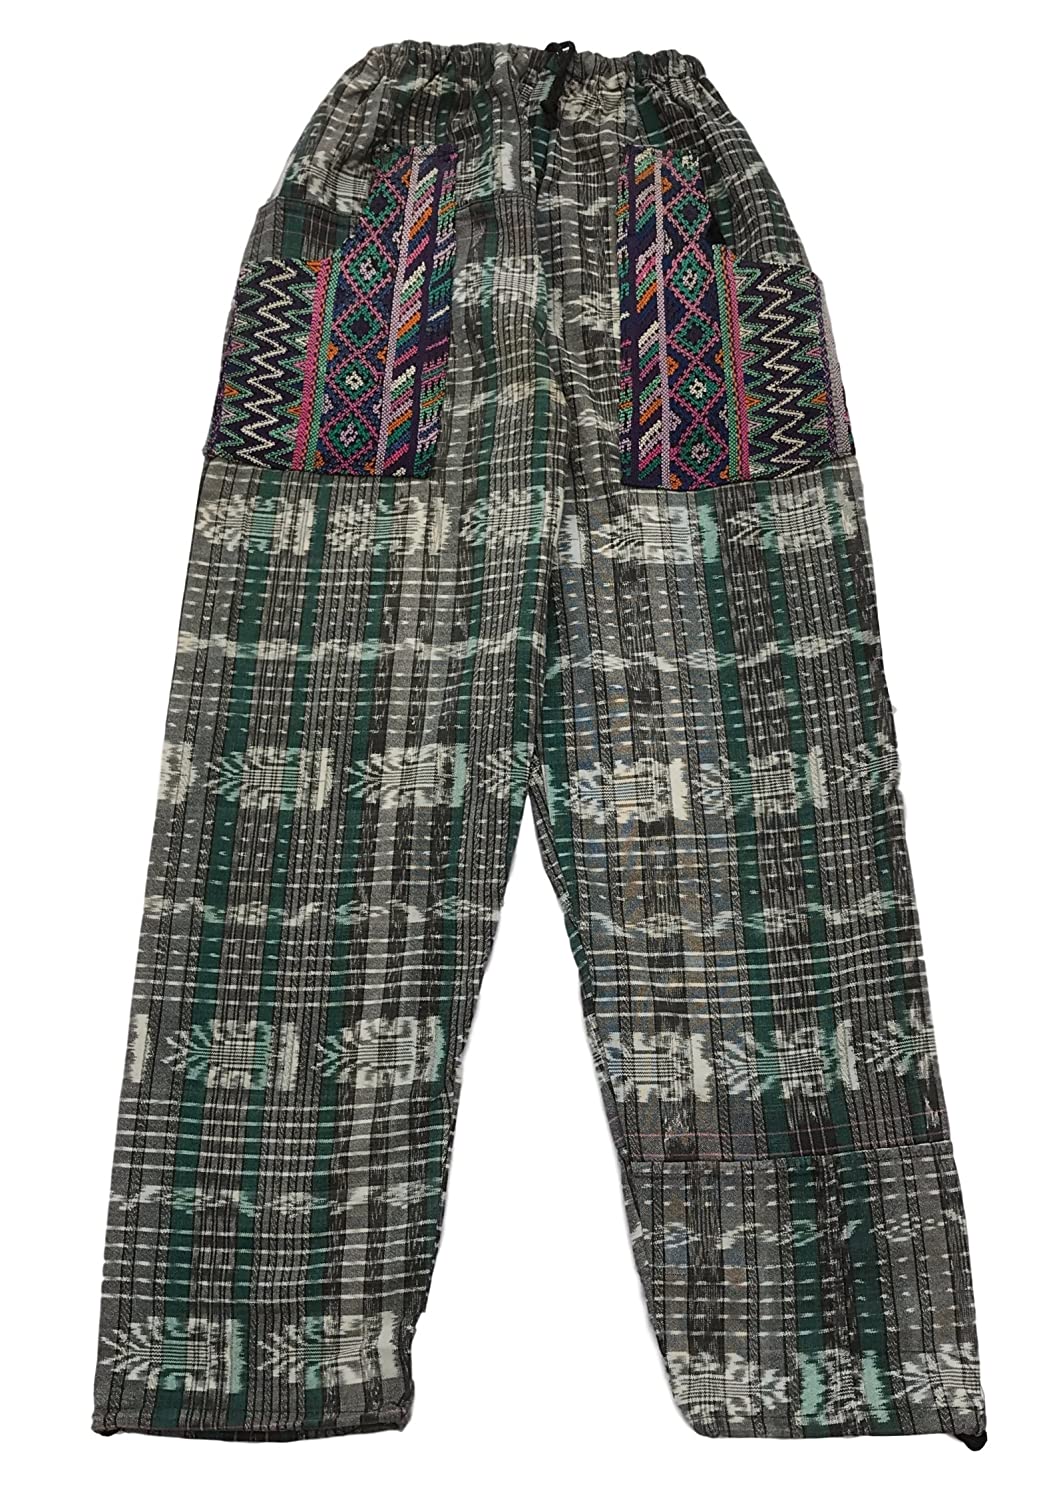 Guatemalan Corte Style Pants with Huipil Pockets - Teal Green